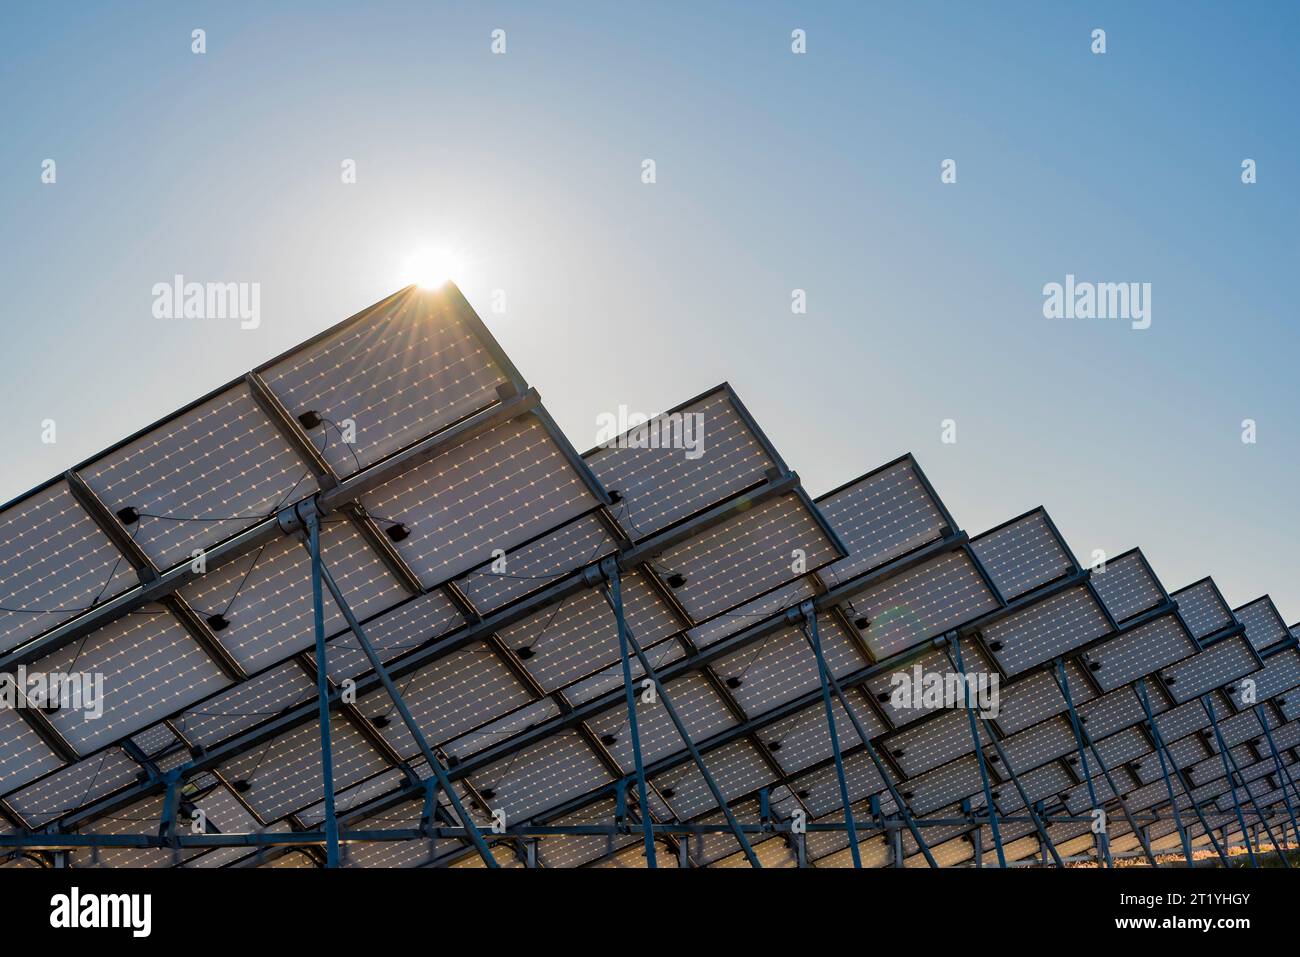 Sun glinting off Solar PV Photovoltaic panels at the Uterne Solar Farm in Central Australia near Alice Springs (Mparntwe) in the Northern Territory Stock Photo